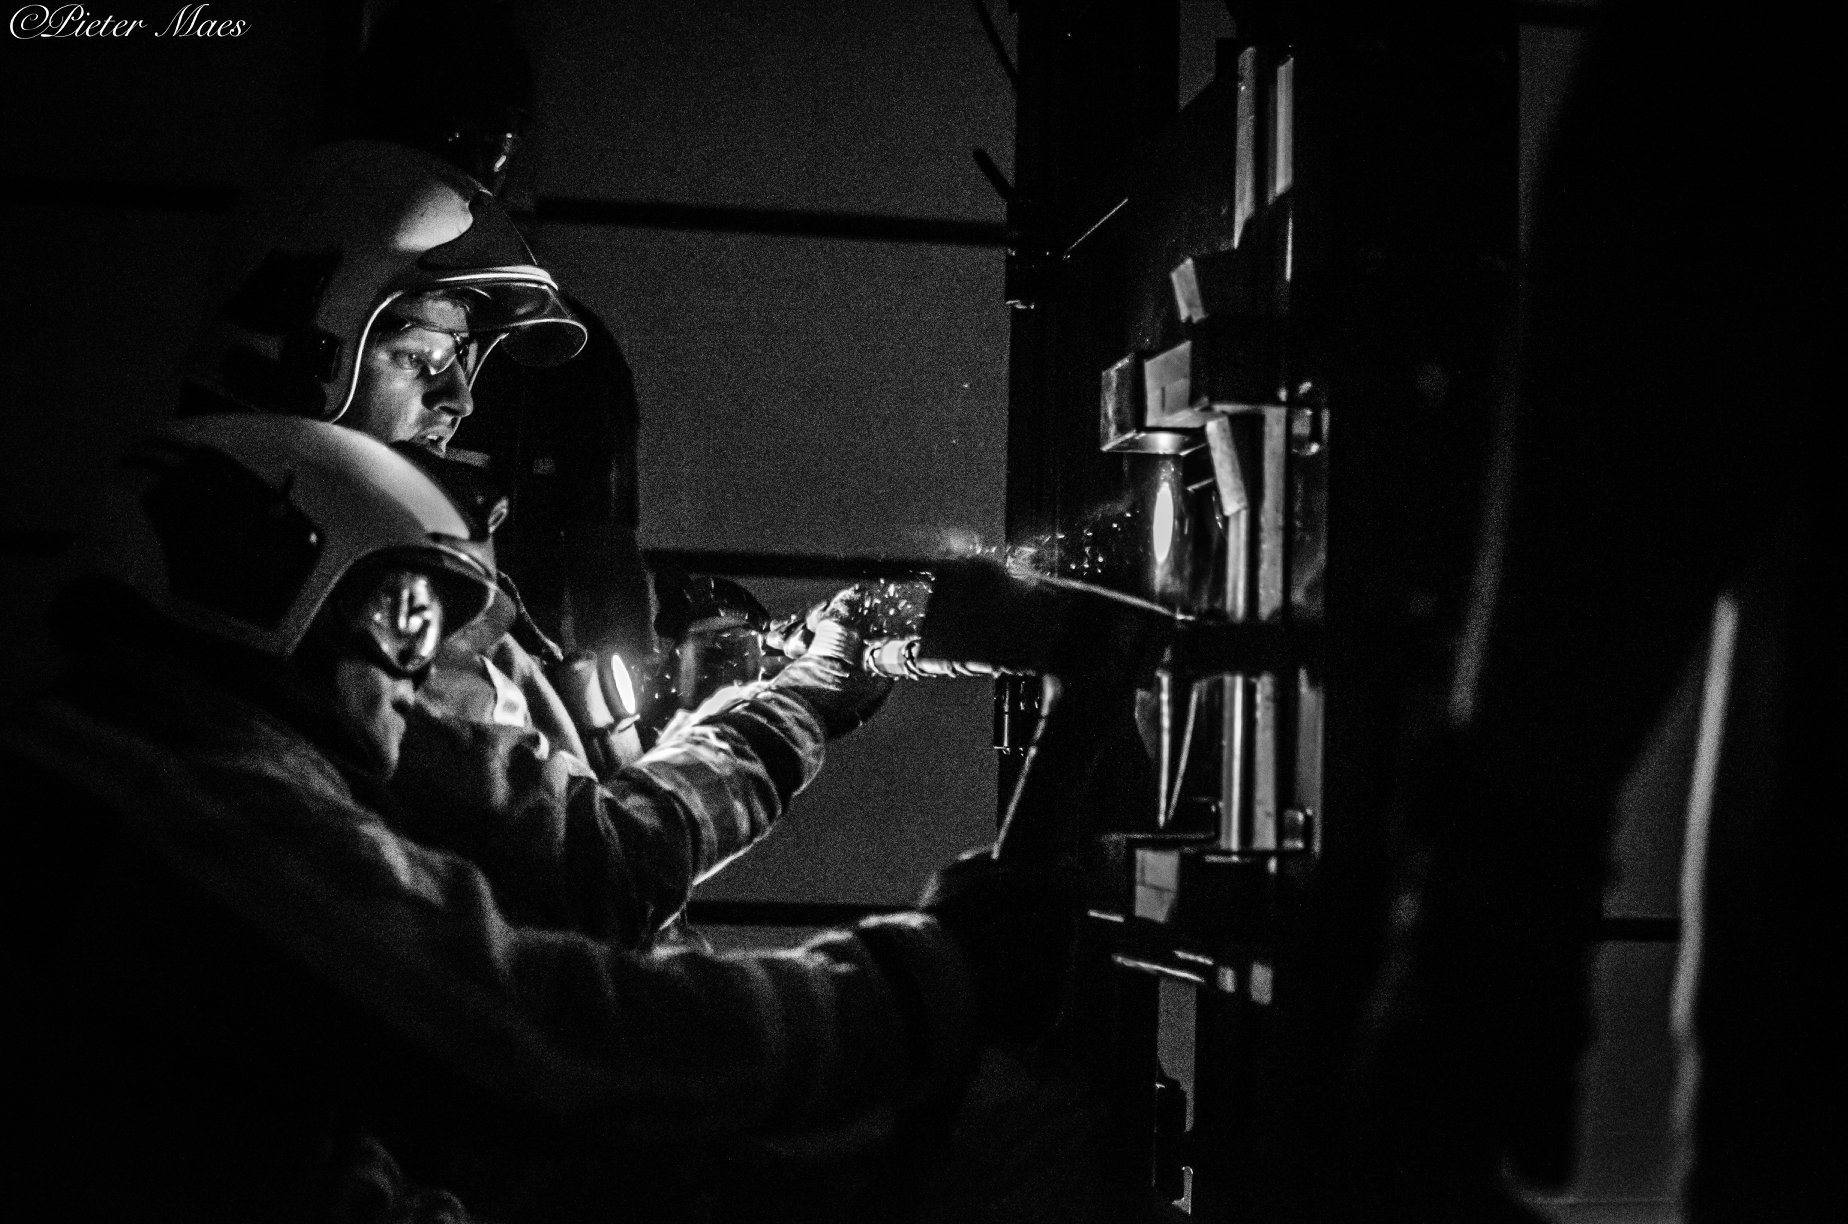 FORCIBLE ENTRY @ DARK